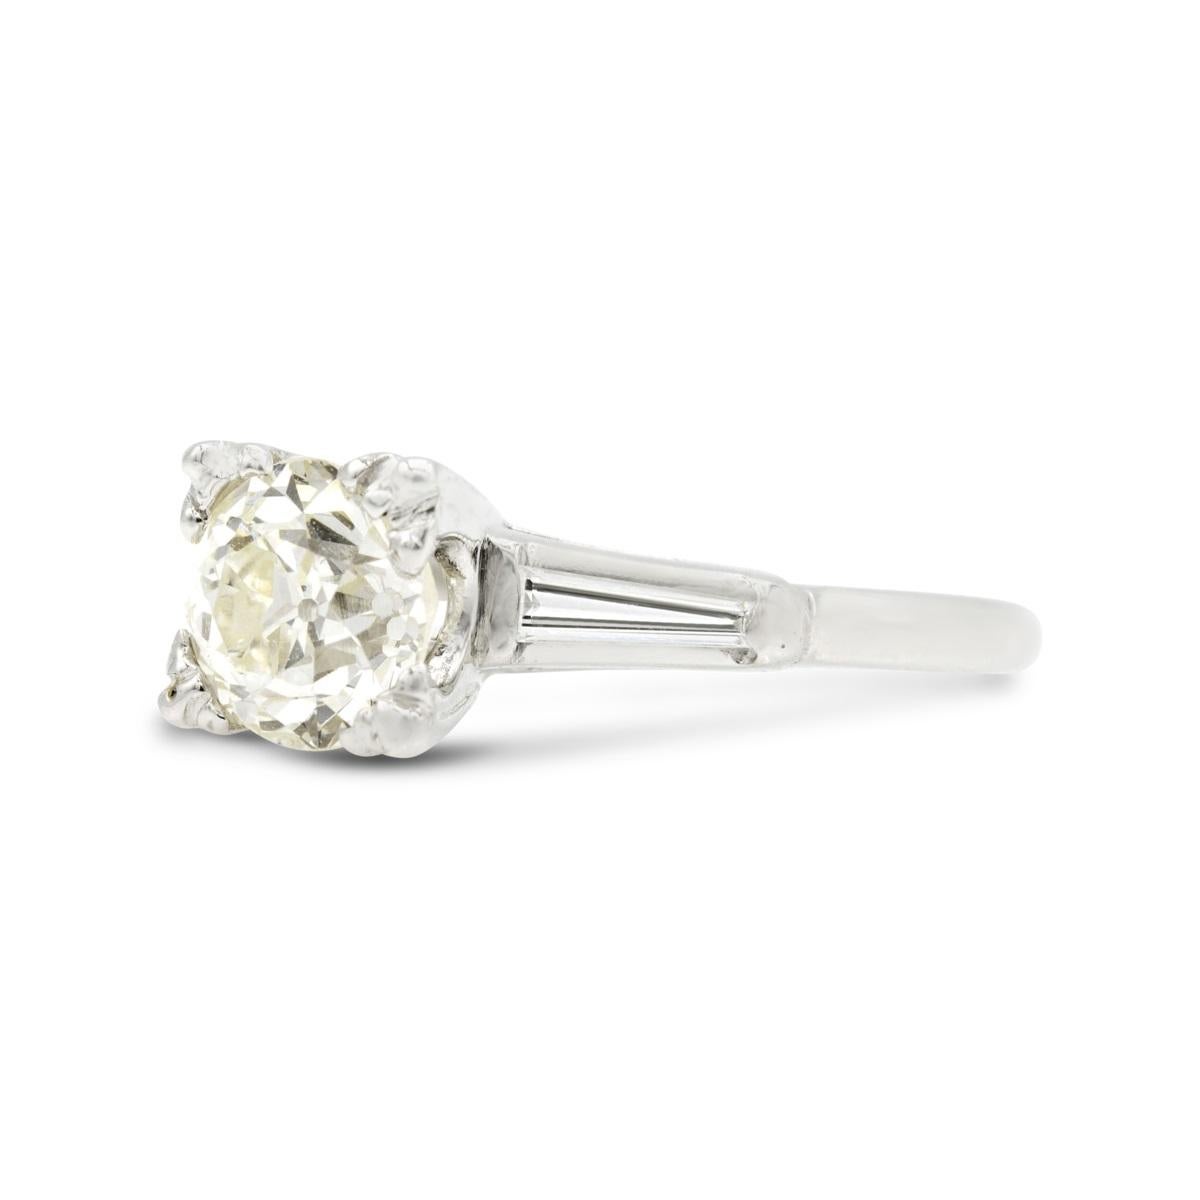 Sophisticated and chic, this timeless vintage engagement ring will charm her way into your heart. Just shy of 1.50 carats, the nearly flawless chunky Old European diamond at the center sparkles. Classic tapered diamond baguettes enhance the sleek